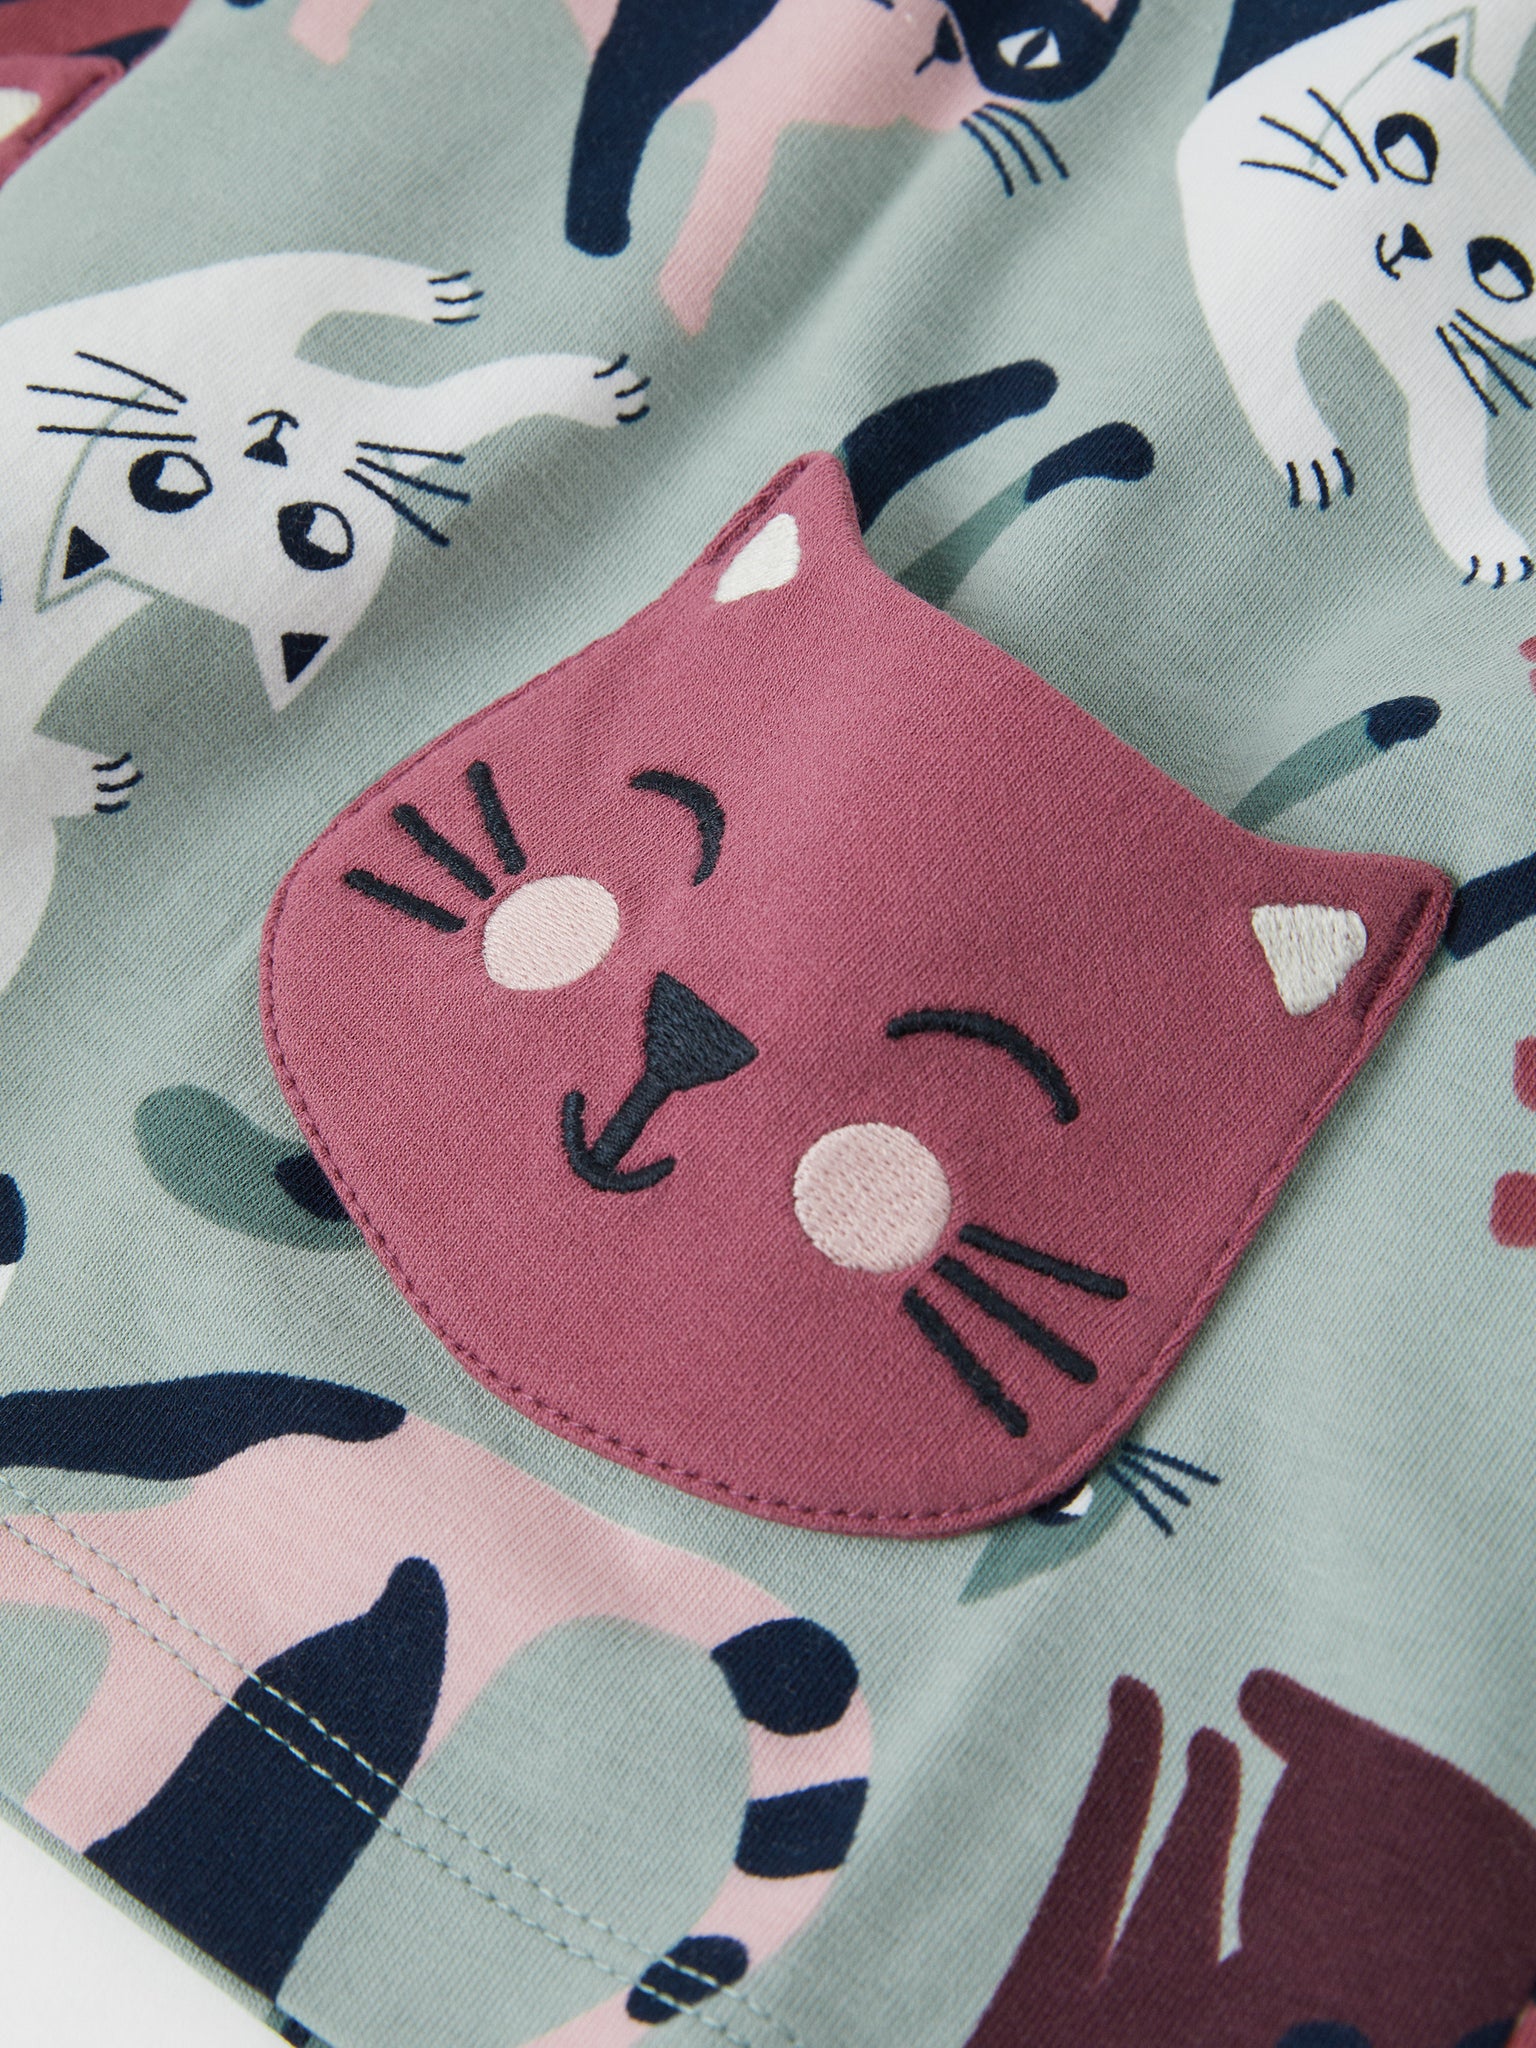 Green Organic Cotton Kids Cat Top from the Polarn O. Pyret kidswear collection. Ethically produced kids clothing.